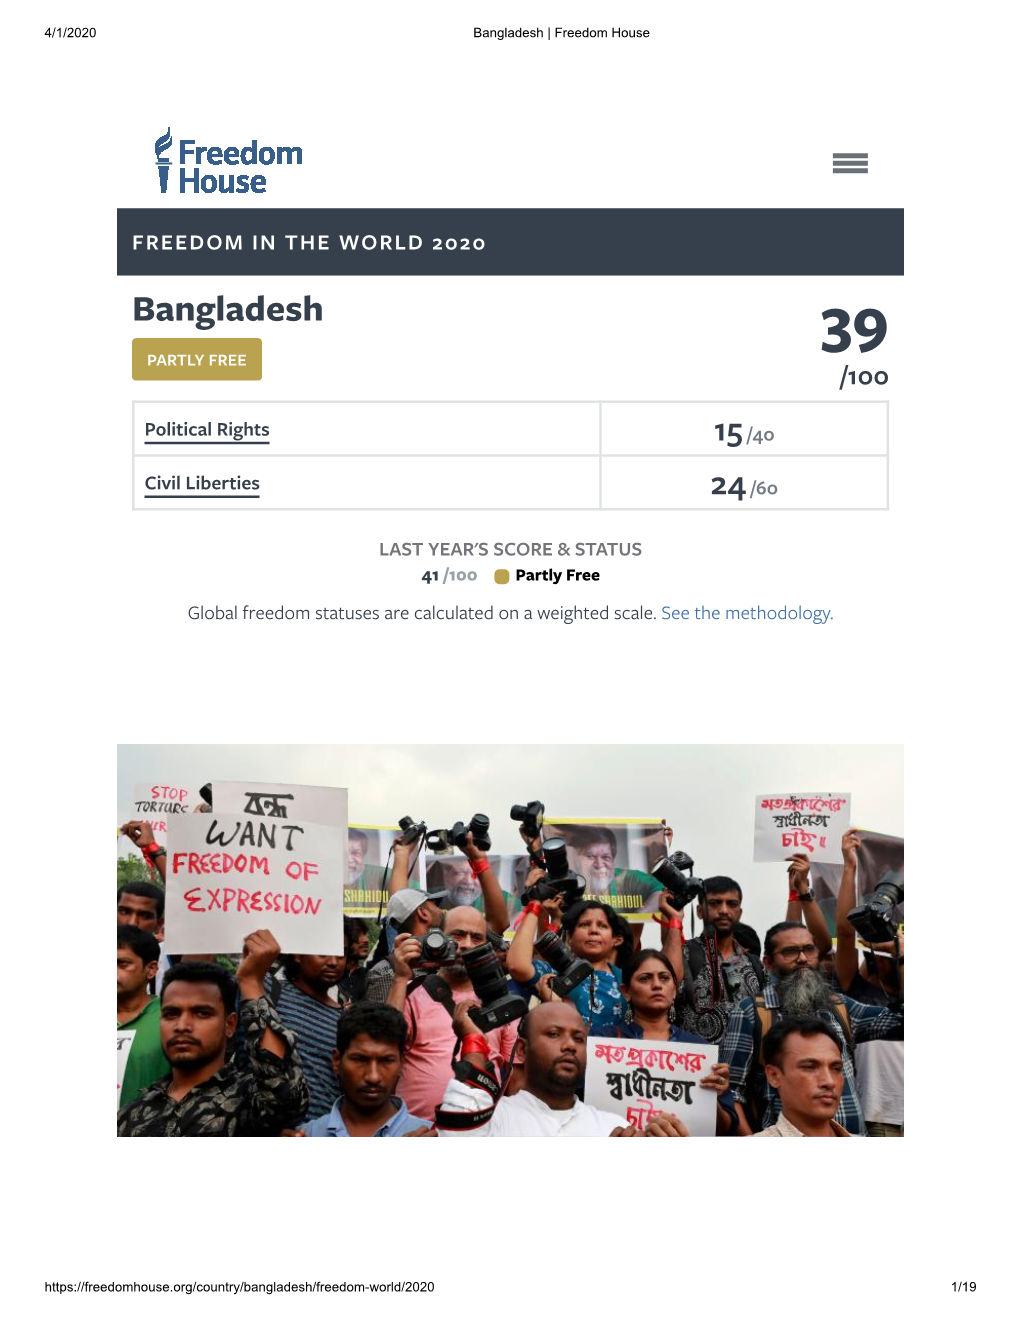 FREEDOM in the WORLD 2020 Bangladesh 39 PARTLY FREE /100